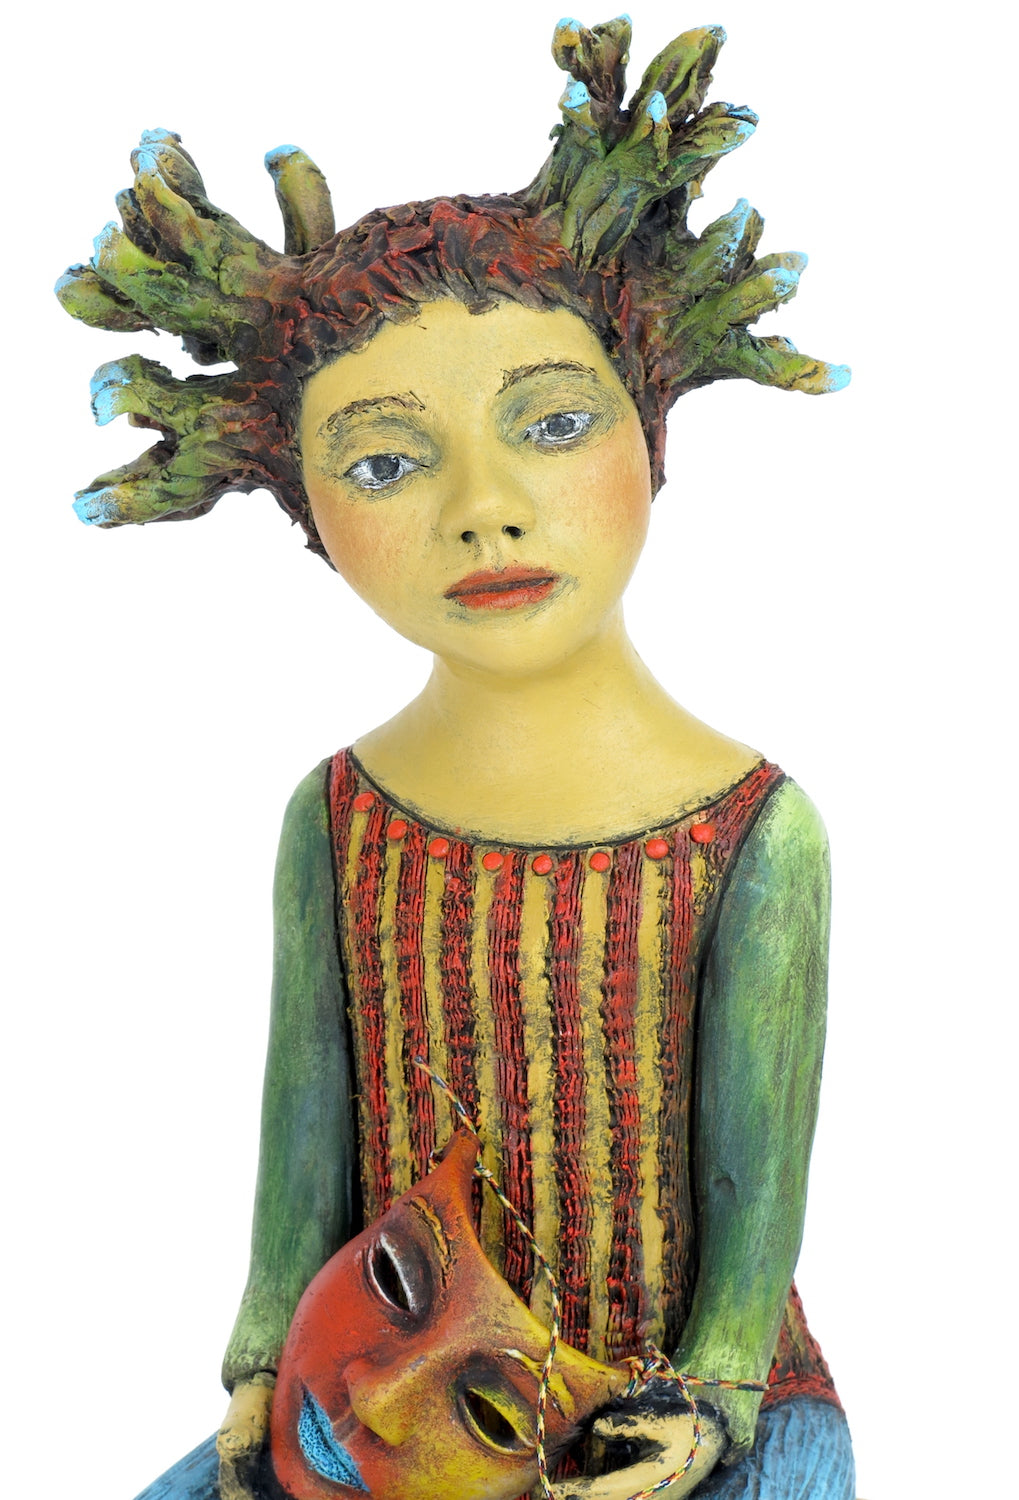 SOLD   "Weighing the Cost of Her Masquerade" Original ceramic sculpture by Jacquline Hurlbert